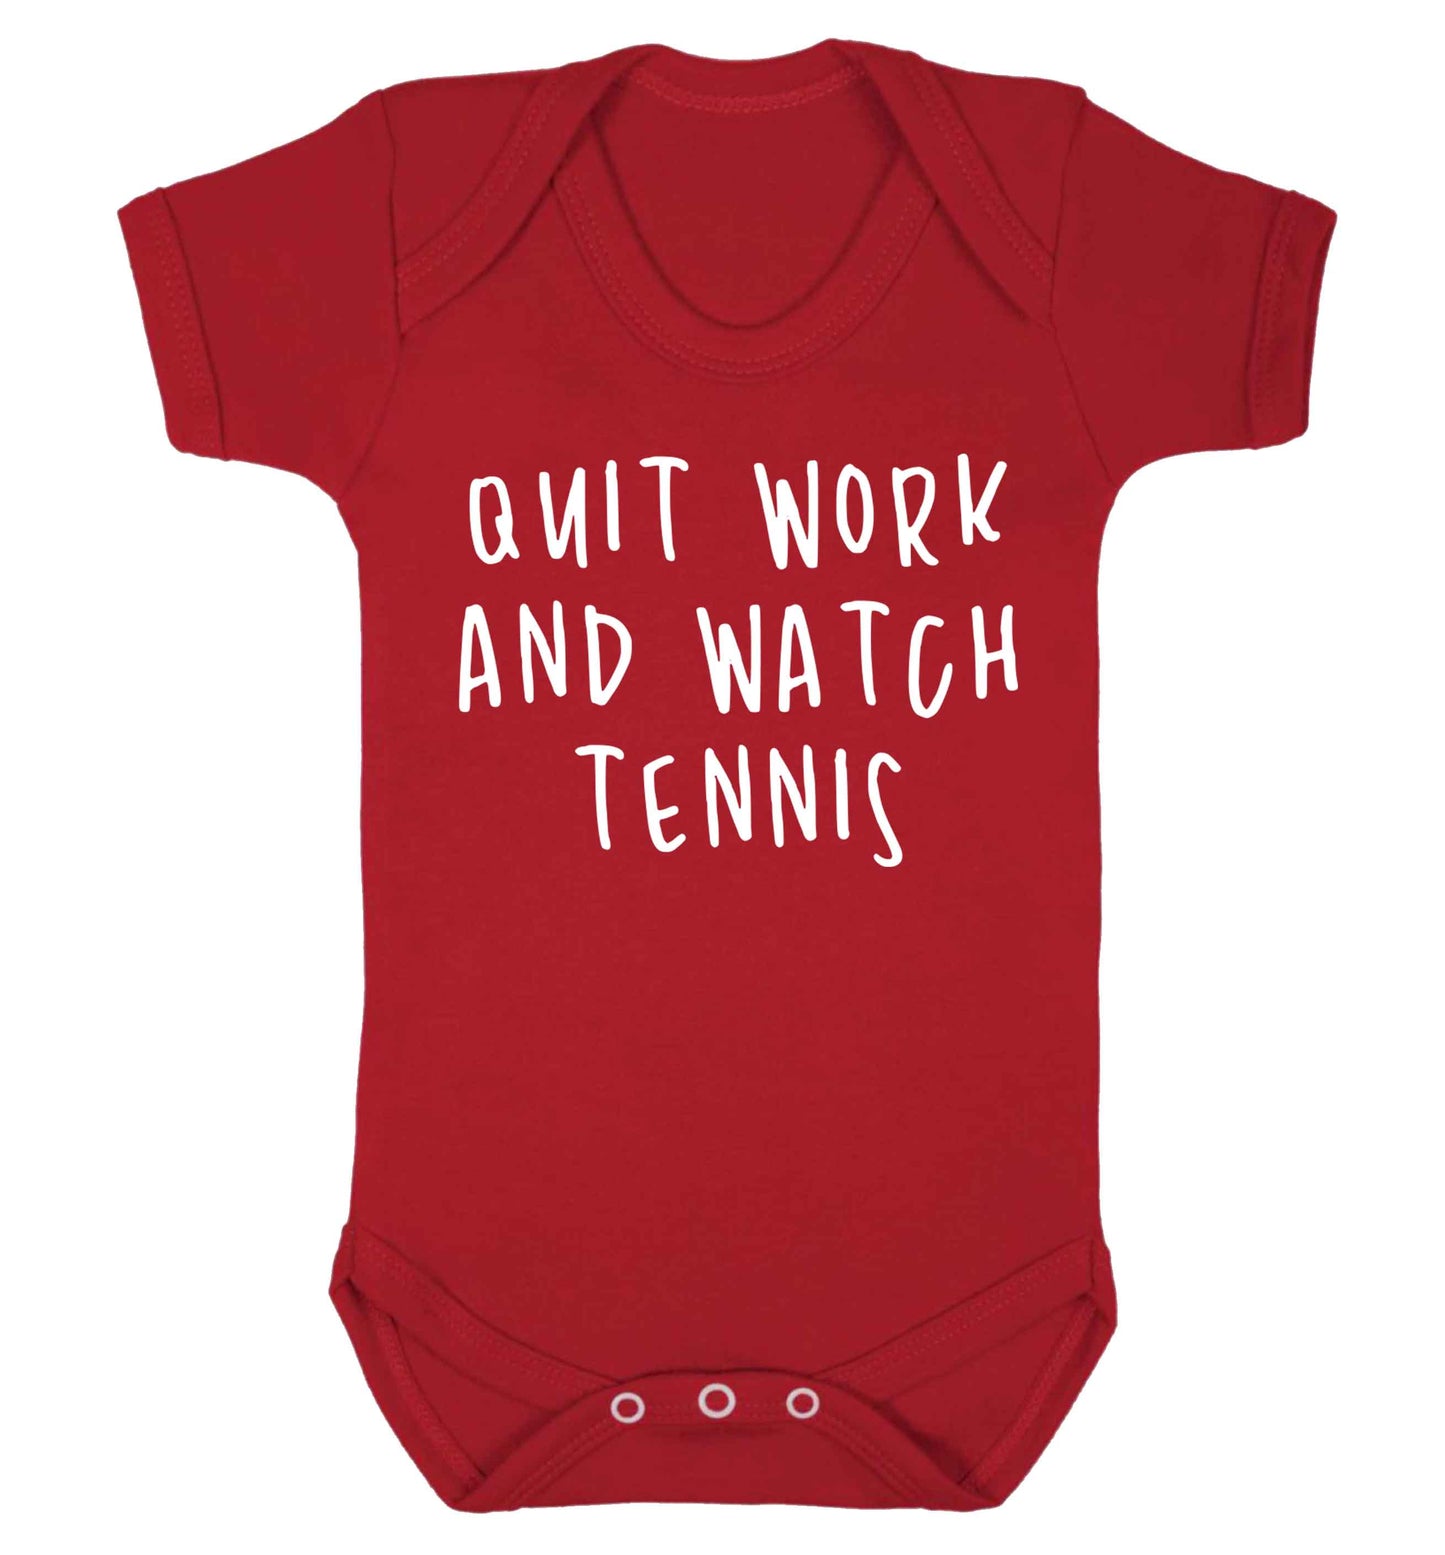 Quit work and watch tennis Baby Vest red 18-24 months